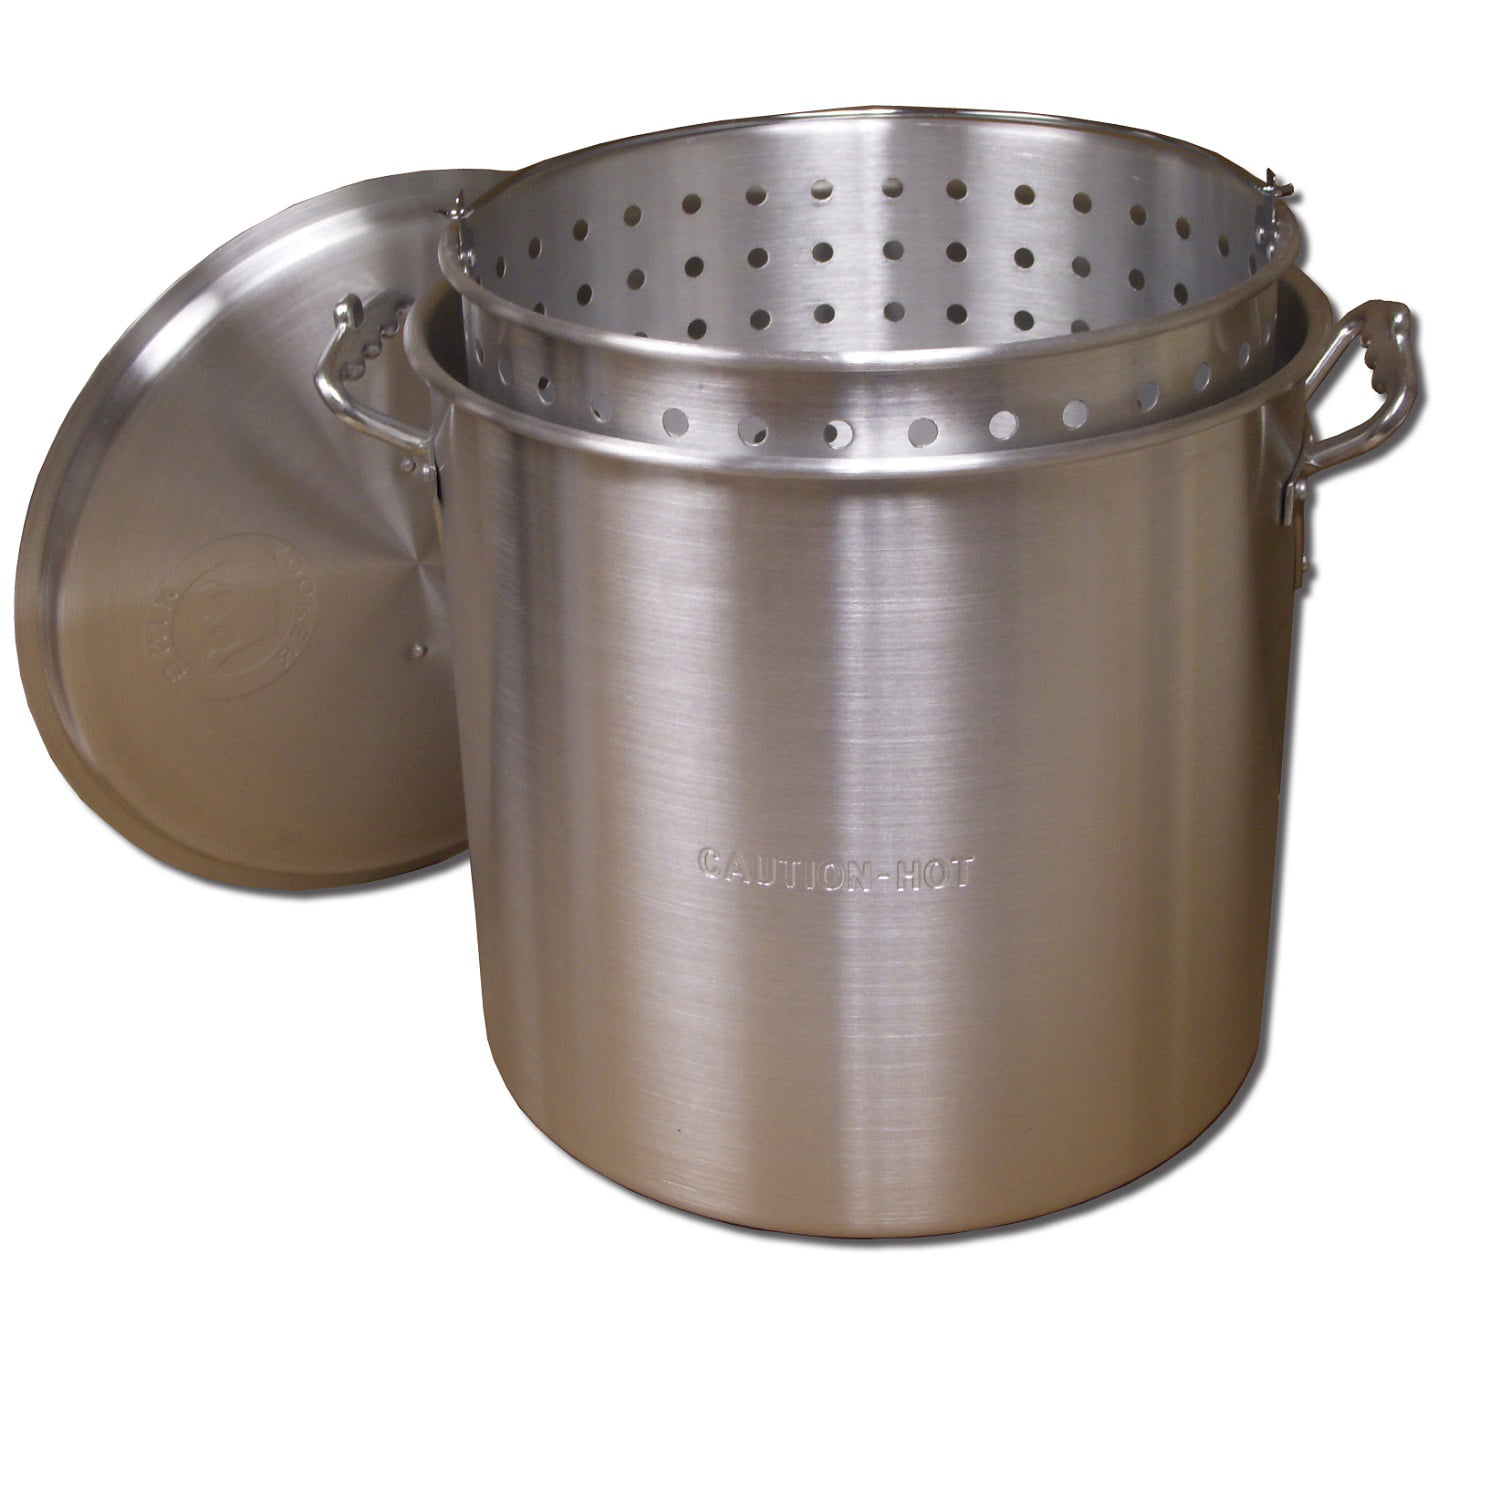 50 Qt Outdoor Cooking Seafood Boiler Steamer Kit with Round Stainless Steel Pot 